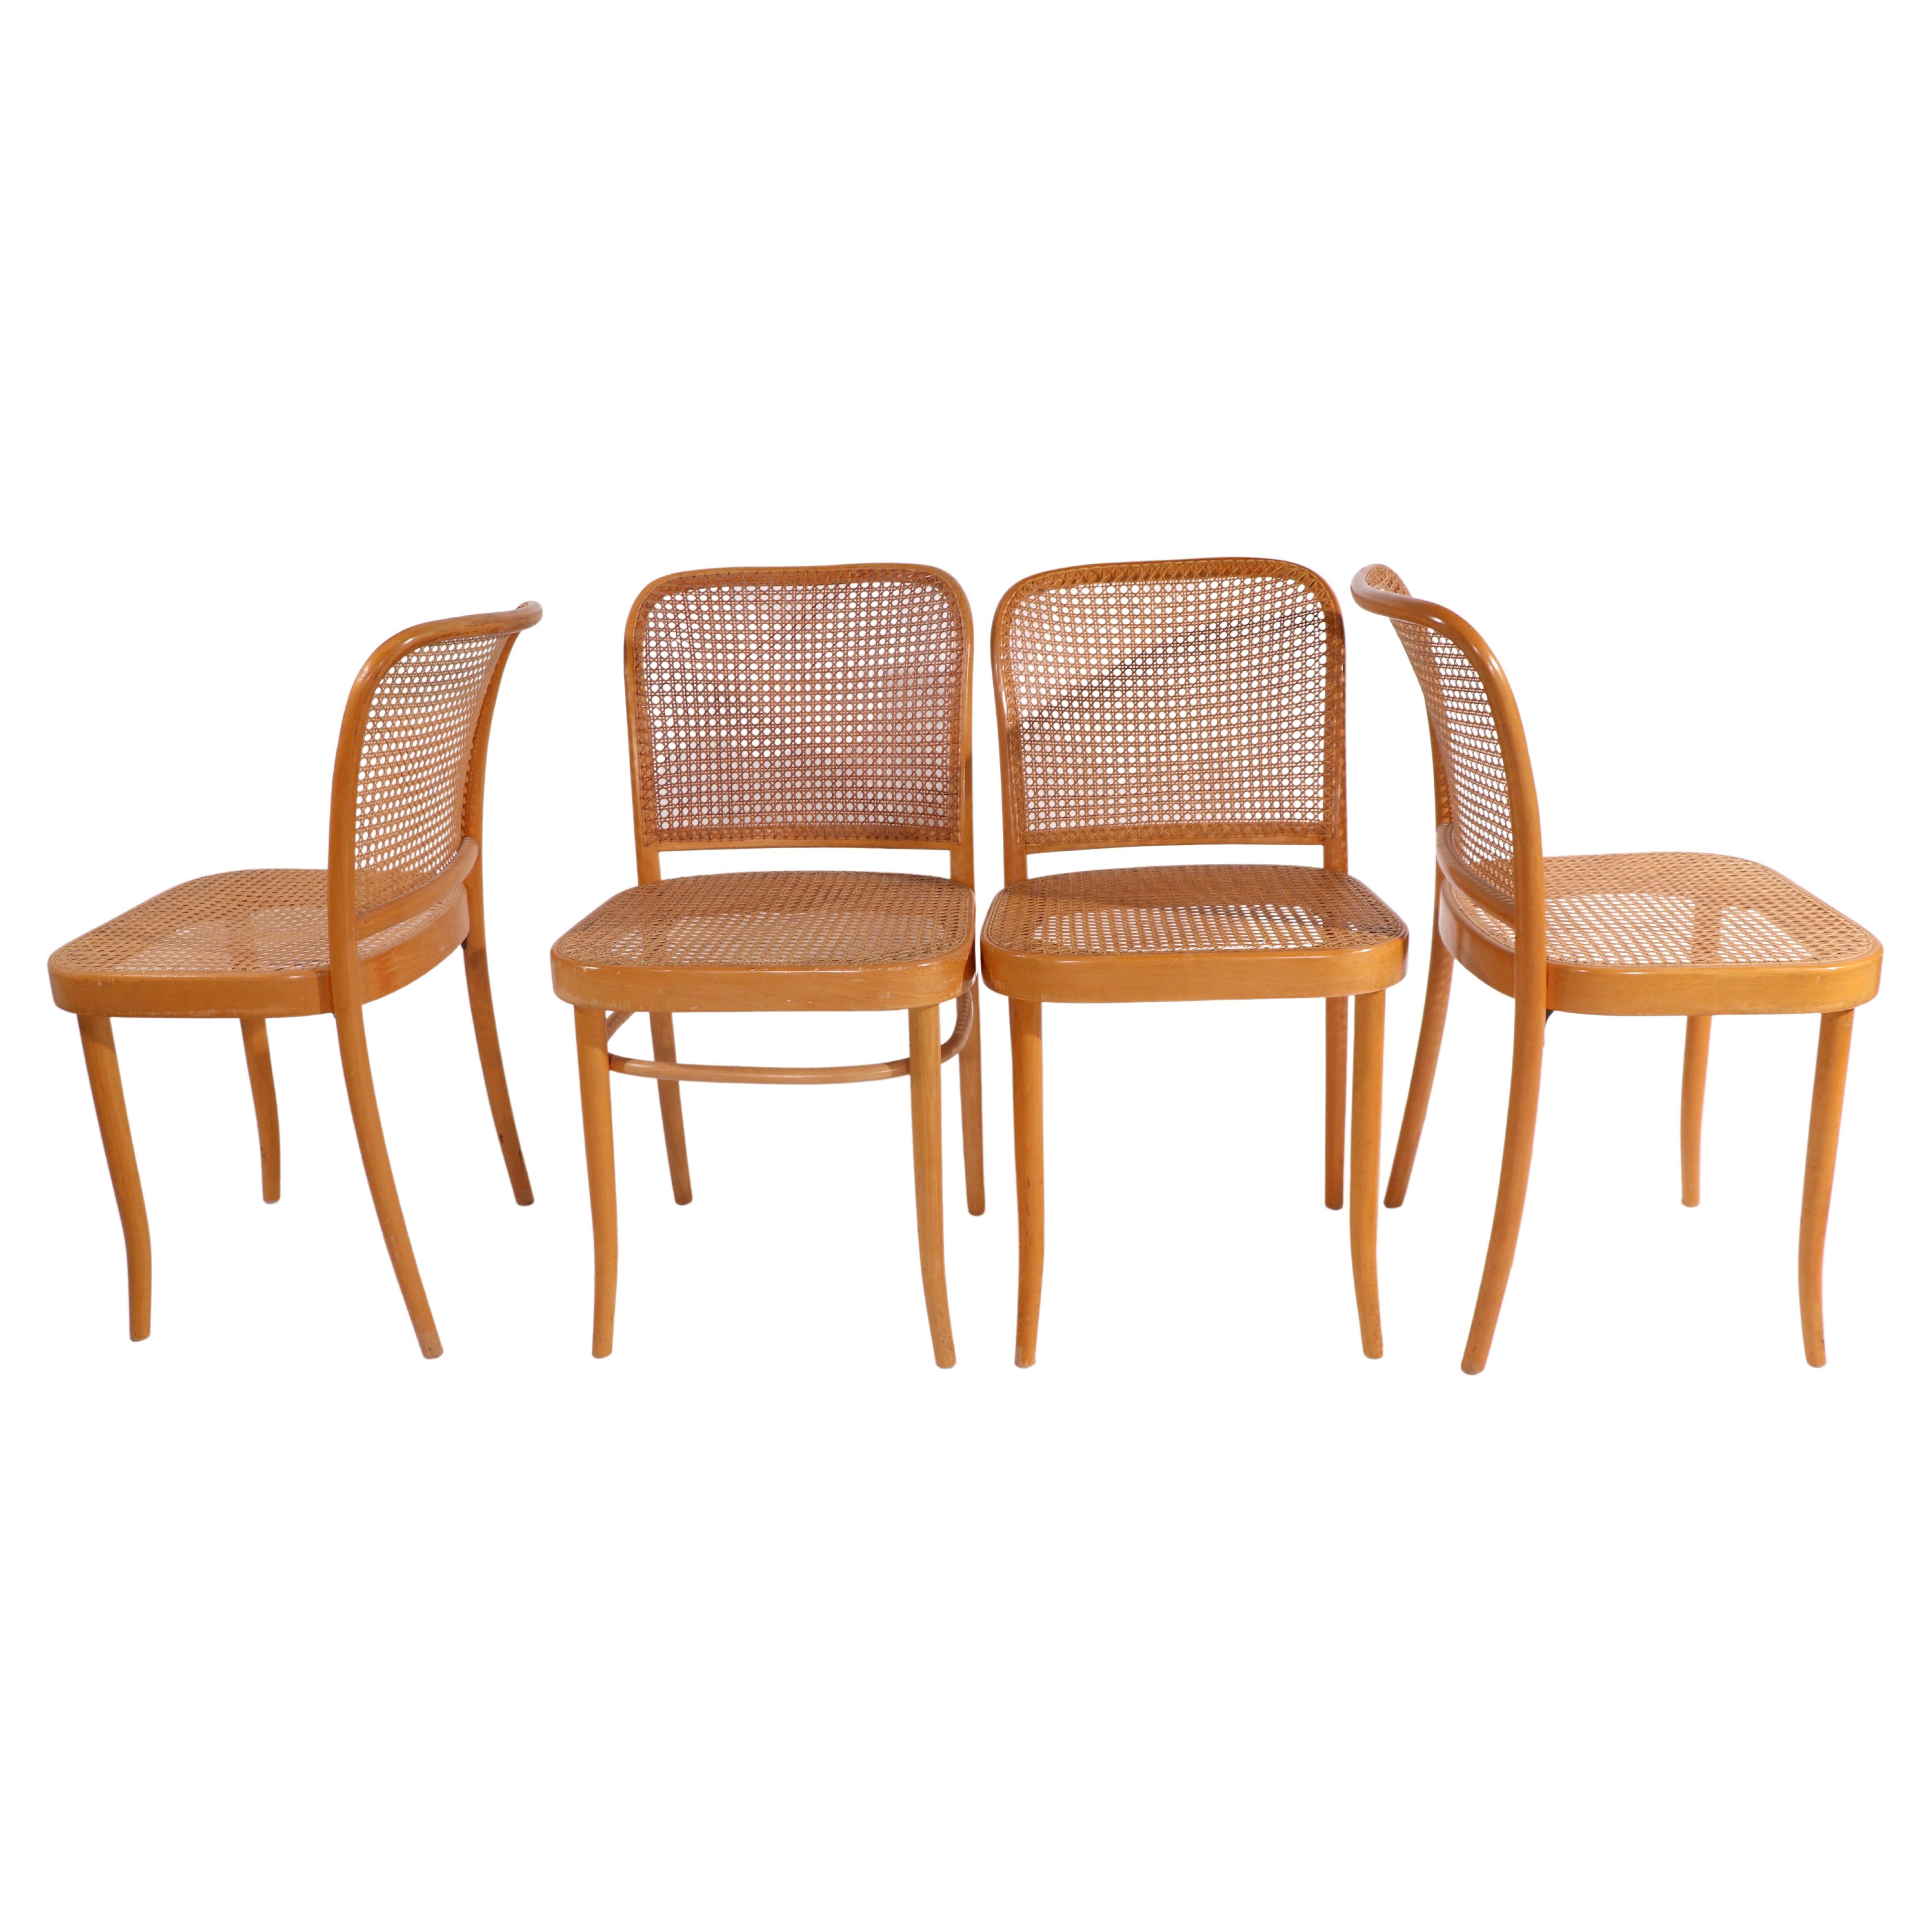 Set of 4 Prague Chairs by Breuer for Stendig